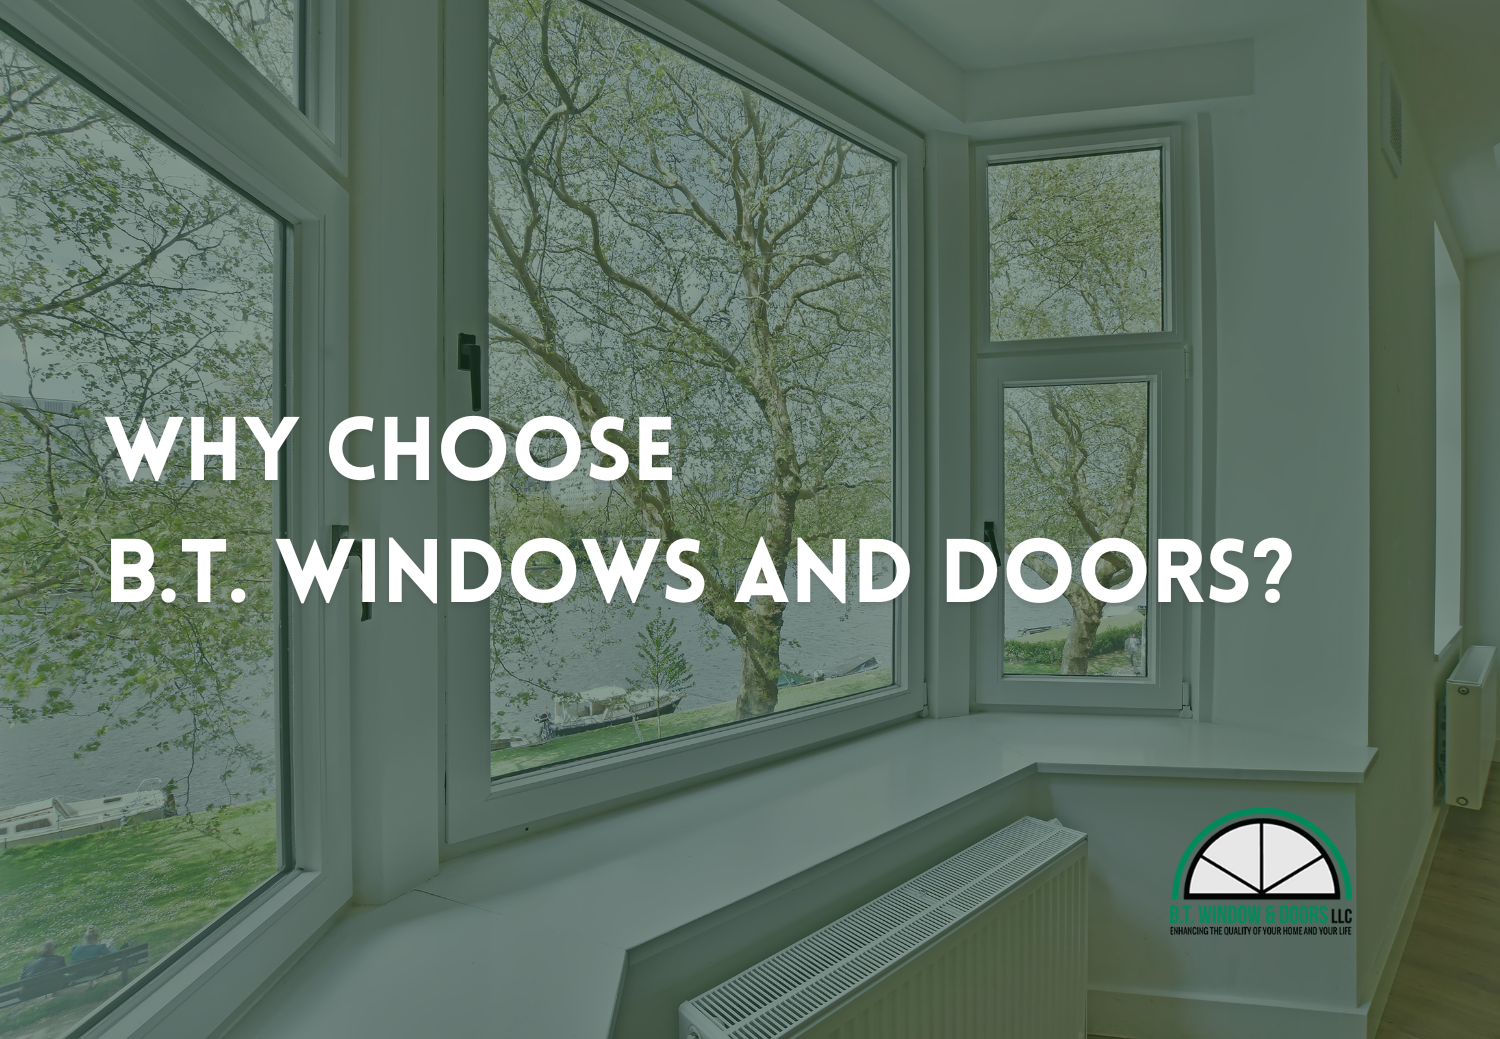 Why Choose B.T. Windows and Doors?